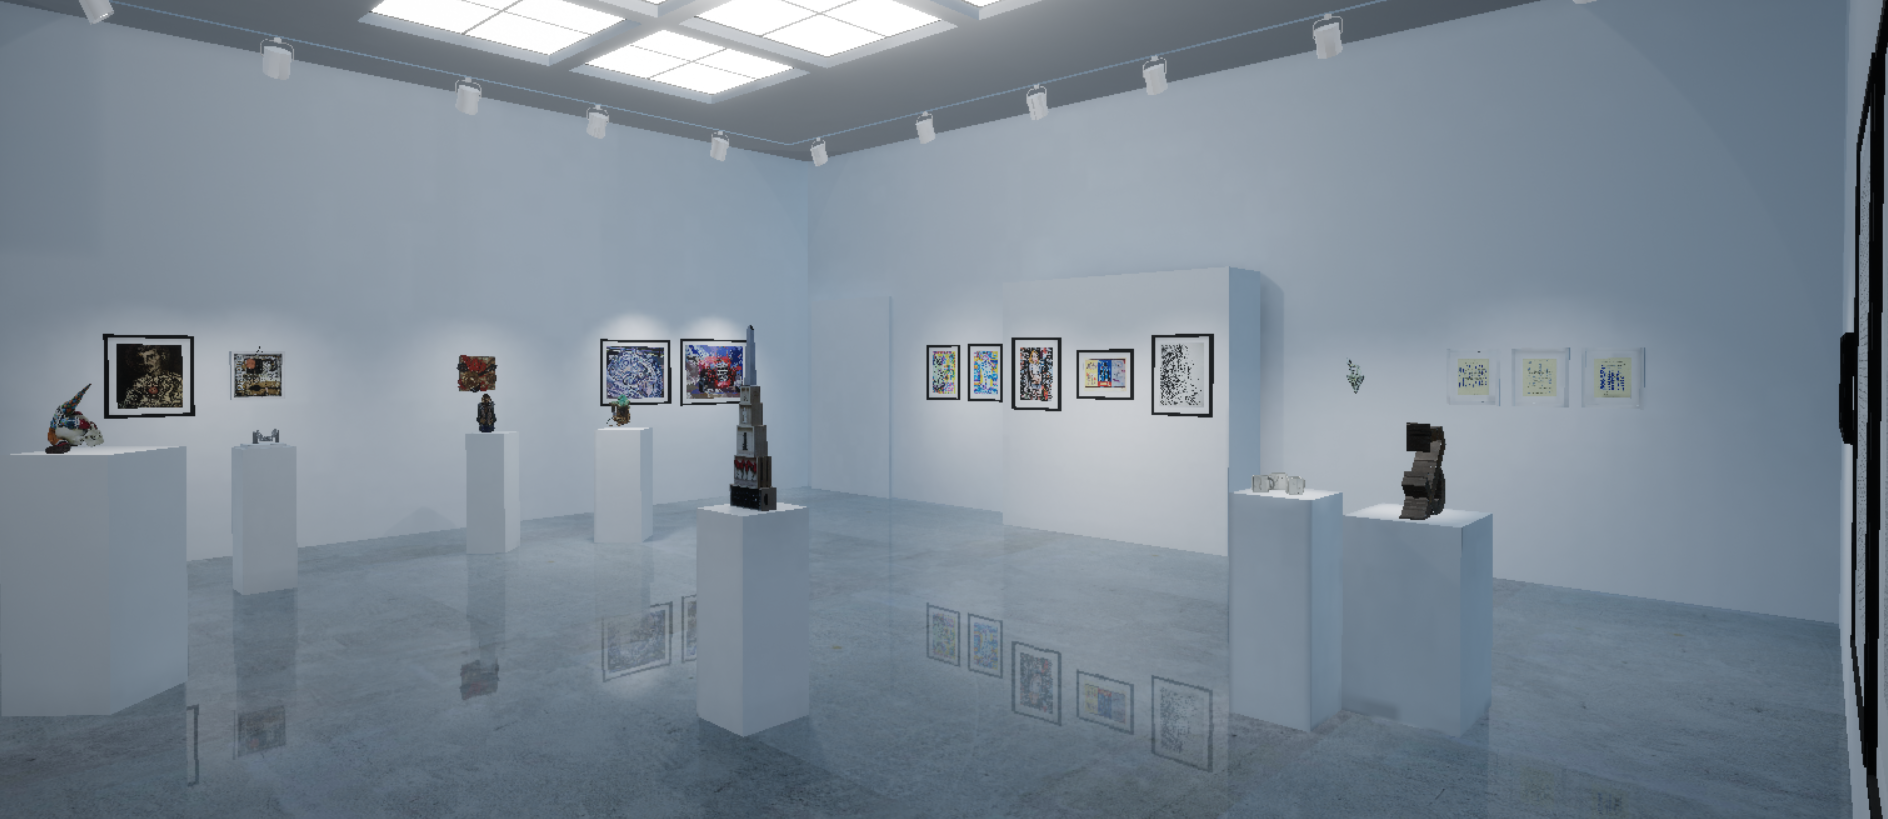 Installation View, Front West Gallery, "Ink & Clay 45" Virtual Exhibition